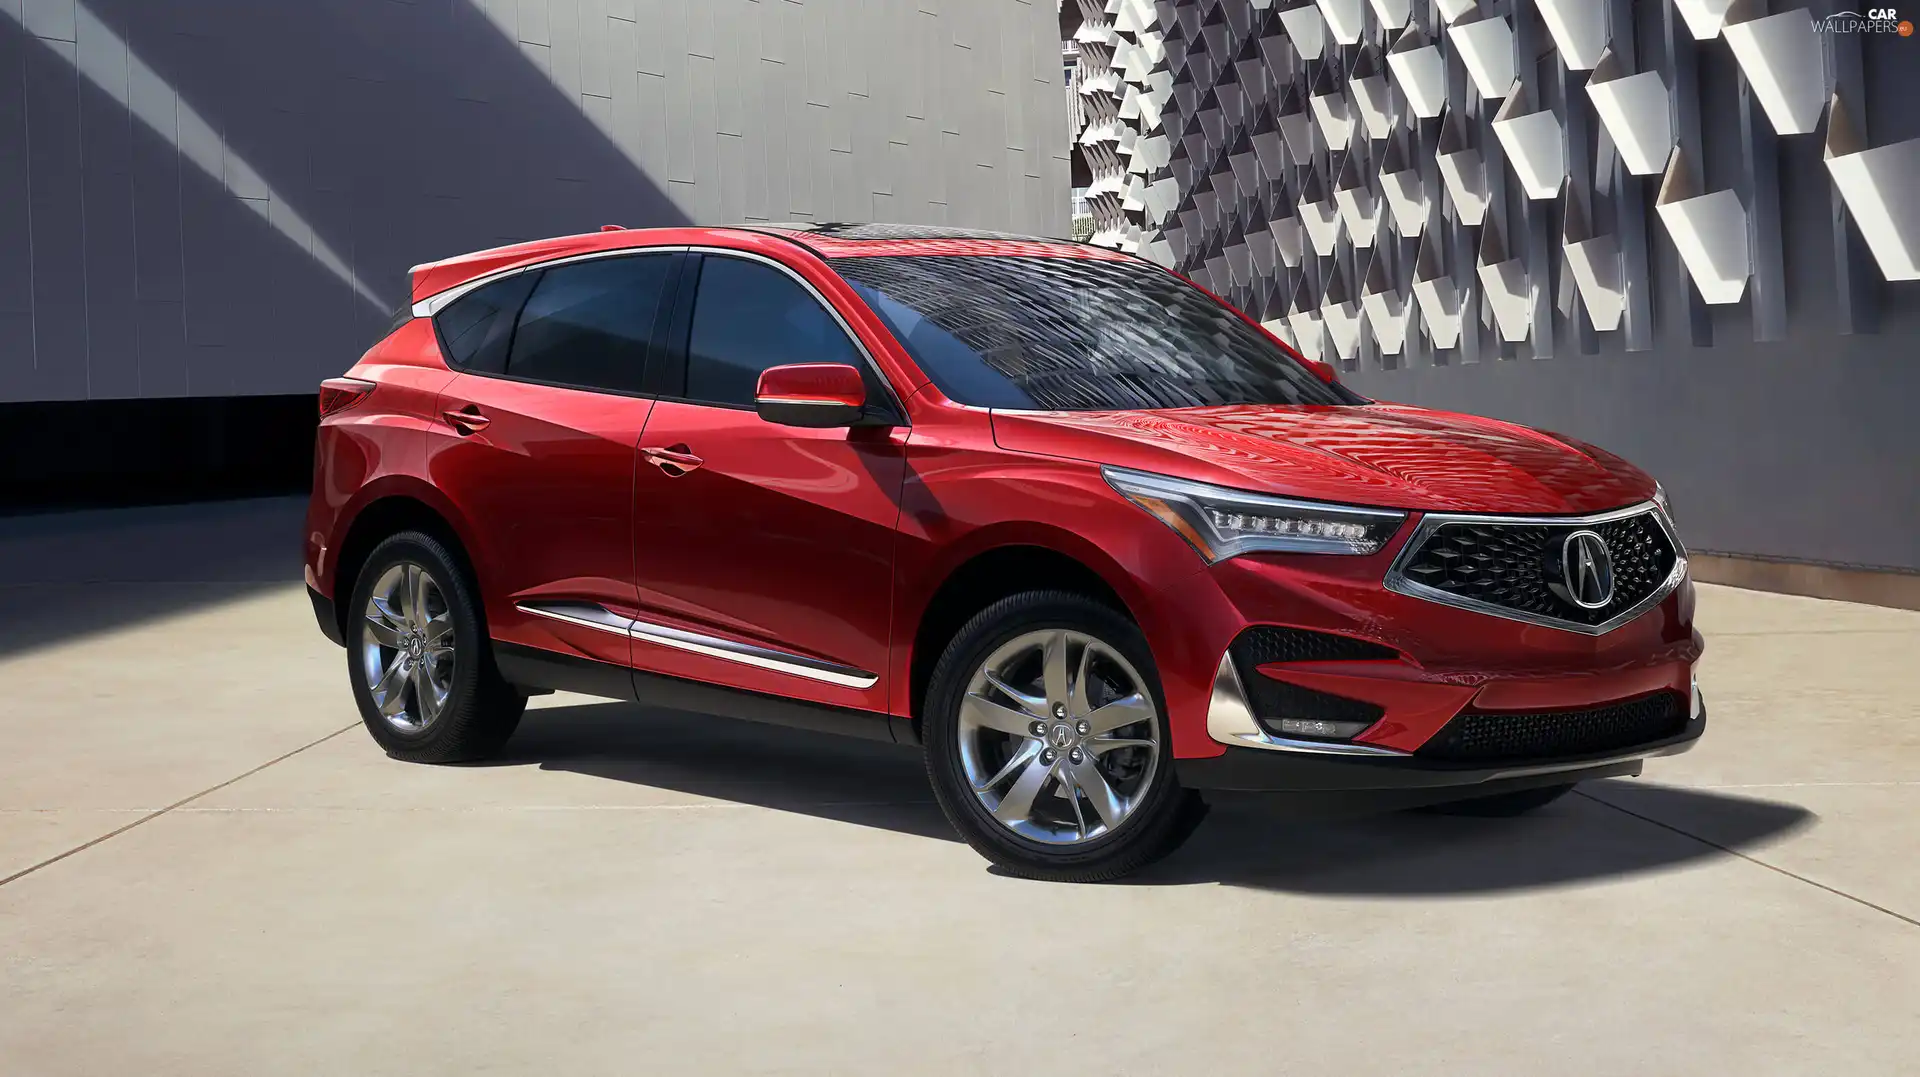 red hot, Acura RDX